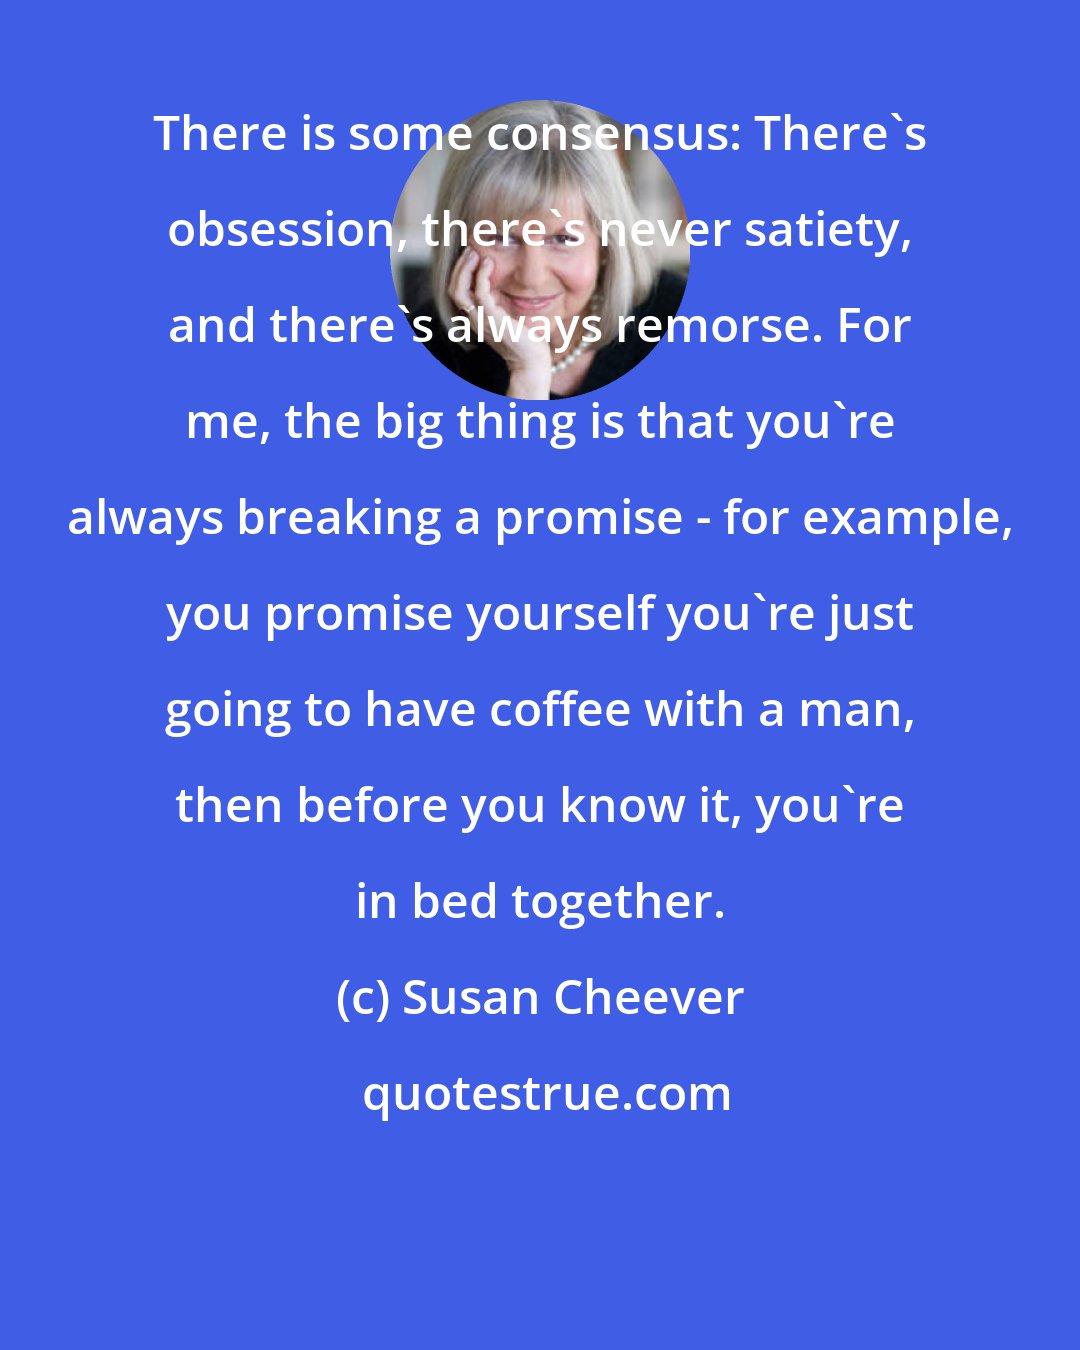 Susan Cheever: There is some consensus: There's obsession, there's never satiety, and there's always remorse. For me, the big thing is that you're always breaking a promise - for example, you promise yourself you're just going to have coffee with a man, then before you know it, you're in bed together.